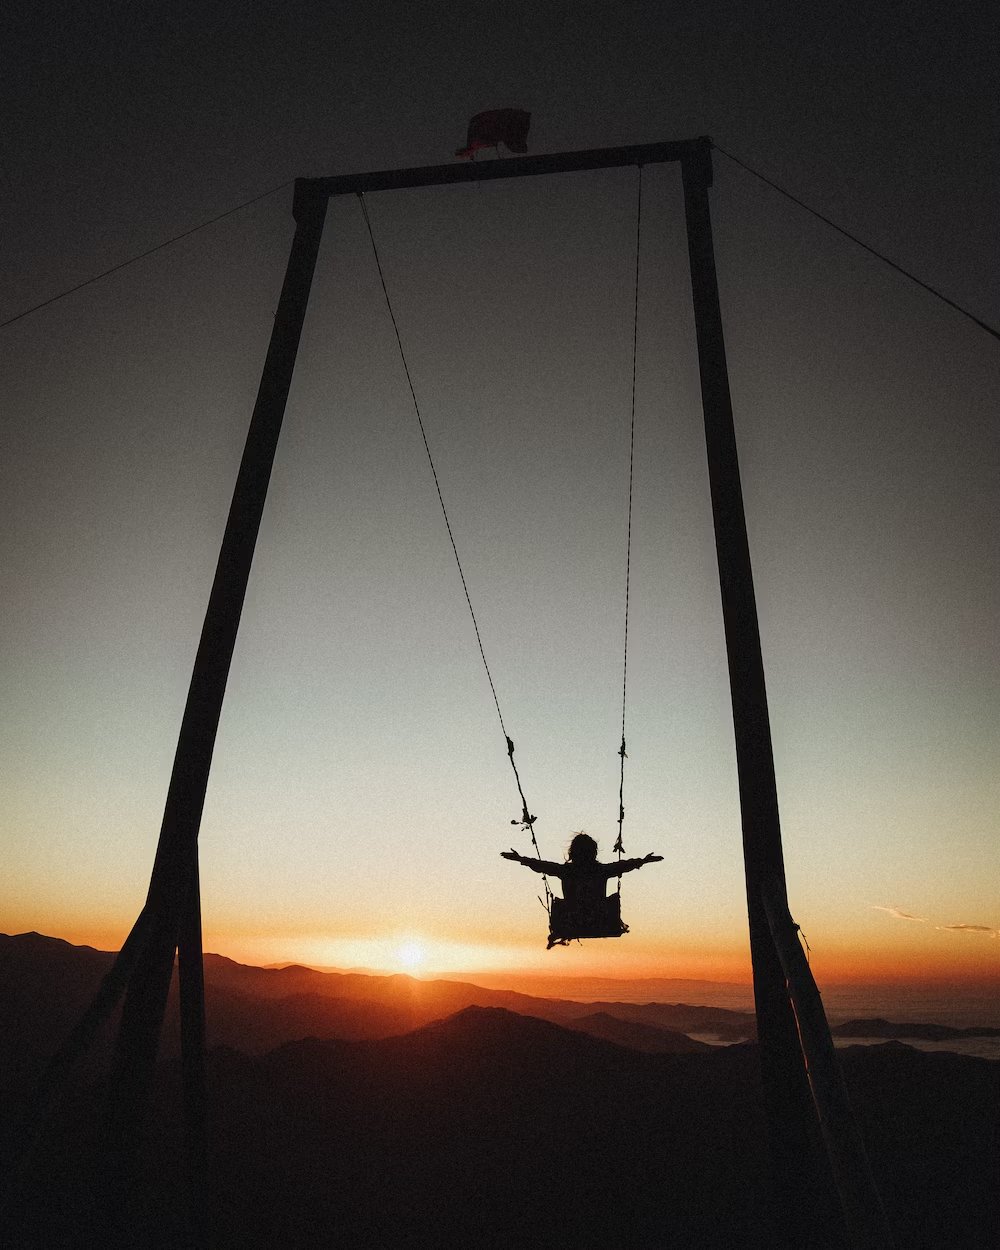 A Girl Enjoying a Swing With Hands in Air Against Sunset